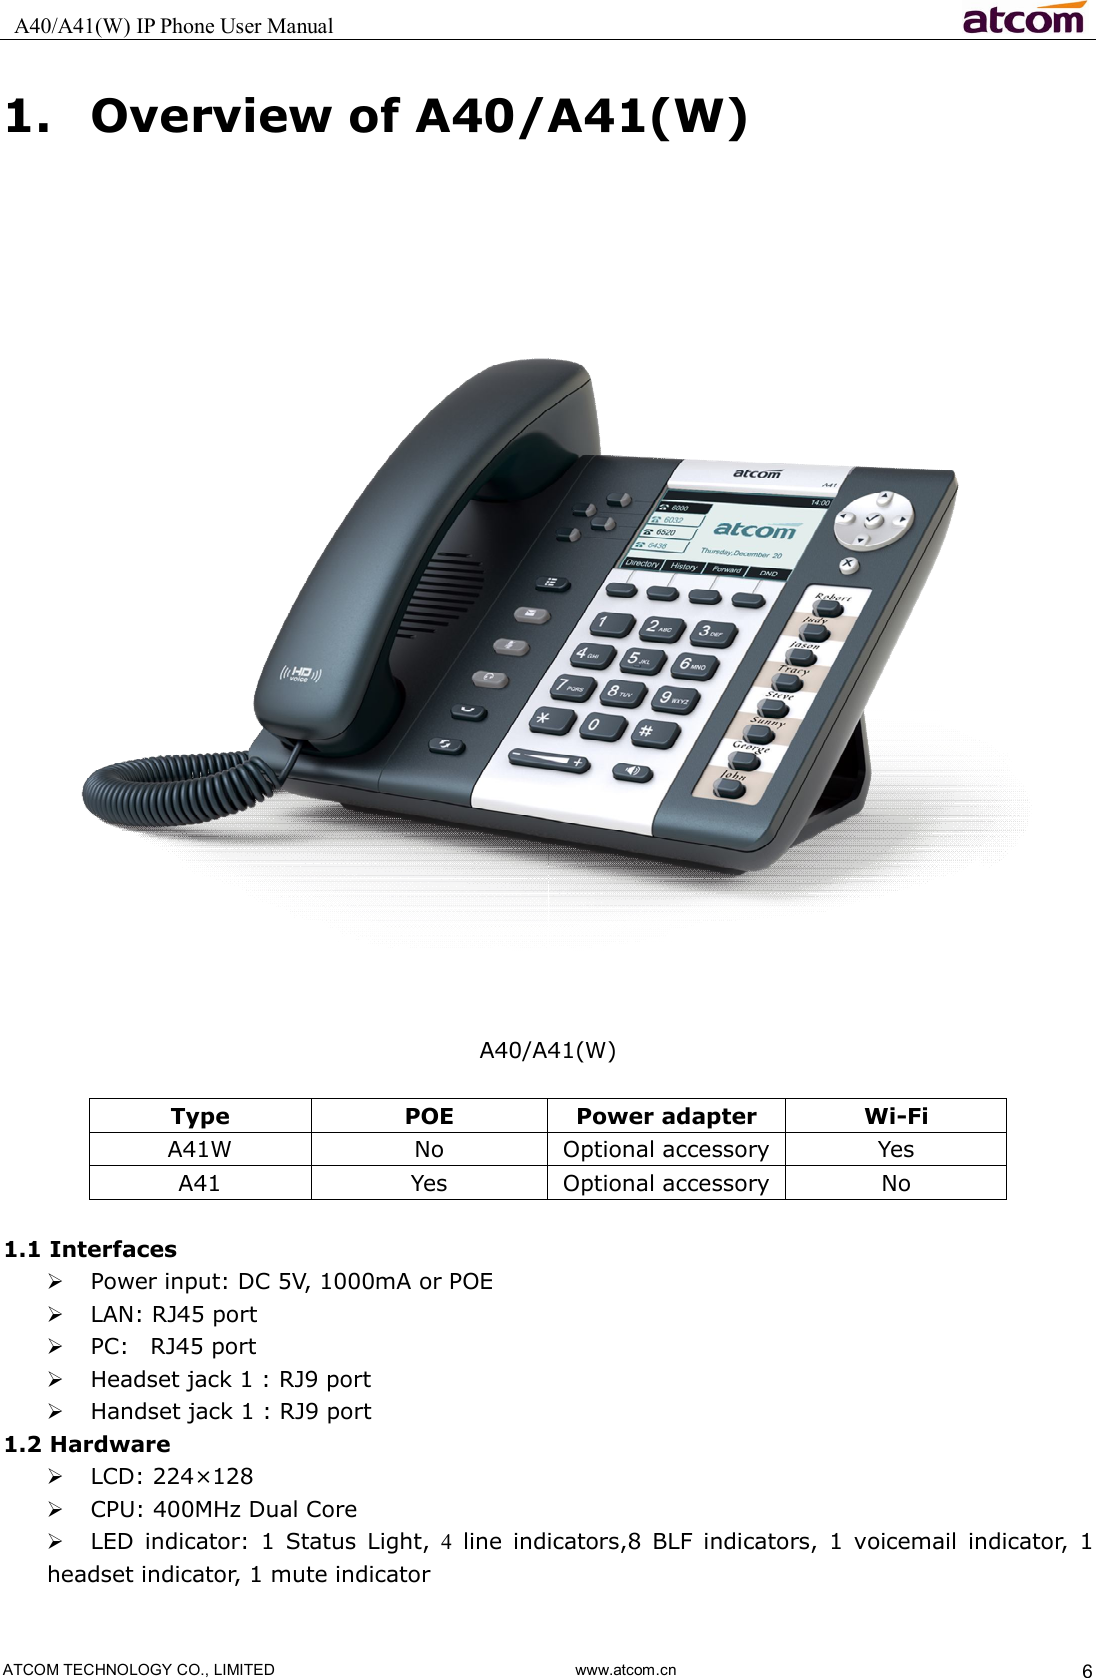   A40/A41(W) IP Phone User Manual                                                                     ATCOM TECHNOLOGY CO., LIMITED                              www.atcom.cn  6 1. Overview of A40/A41(W)   A40/A41(W)  Type  POE  Power adapter  Wi-Fi A41W  No  Optional accessory  Yes A41  Yes  Optional accessory  No  1.1 Interfaces  Power input: DC 5V, 1000mA or POE  LAN: RJ45 port  PC:    RJ45 port  Headset jack 1 : RJ9 port    Handset jack 1 : RJ9 port 1.2 Hardware  LCD: 224×128    CPU: 400MHz Dual Core  LED  indicator:  1  Status  Light,  4  line  indicators,8  BLF  indicators,  1  voicemail  indicator,  1 headset indicator, 1 mute indicator 